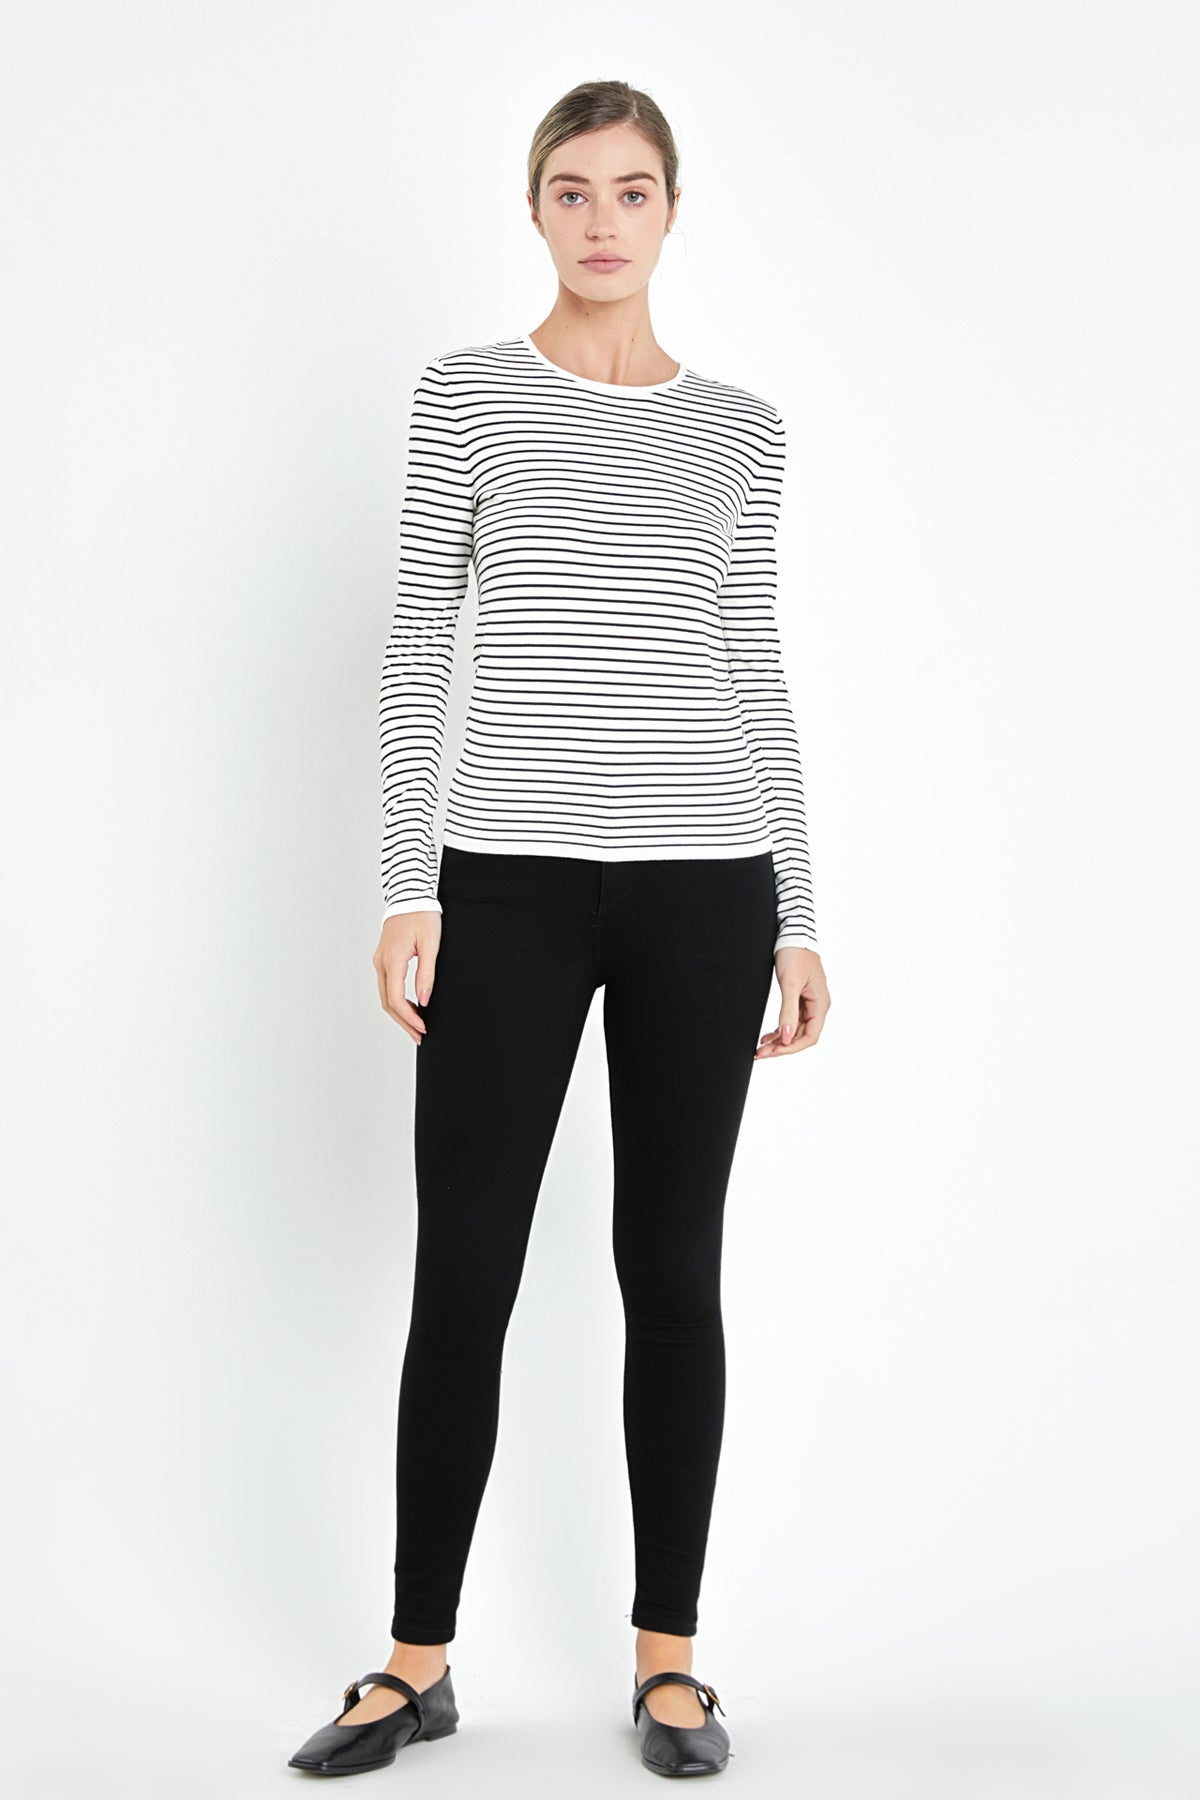 ENGLISH FACTORY - Stripe Knit Sweater - SWEATERS & KNITS available at Objectrare